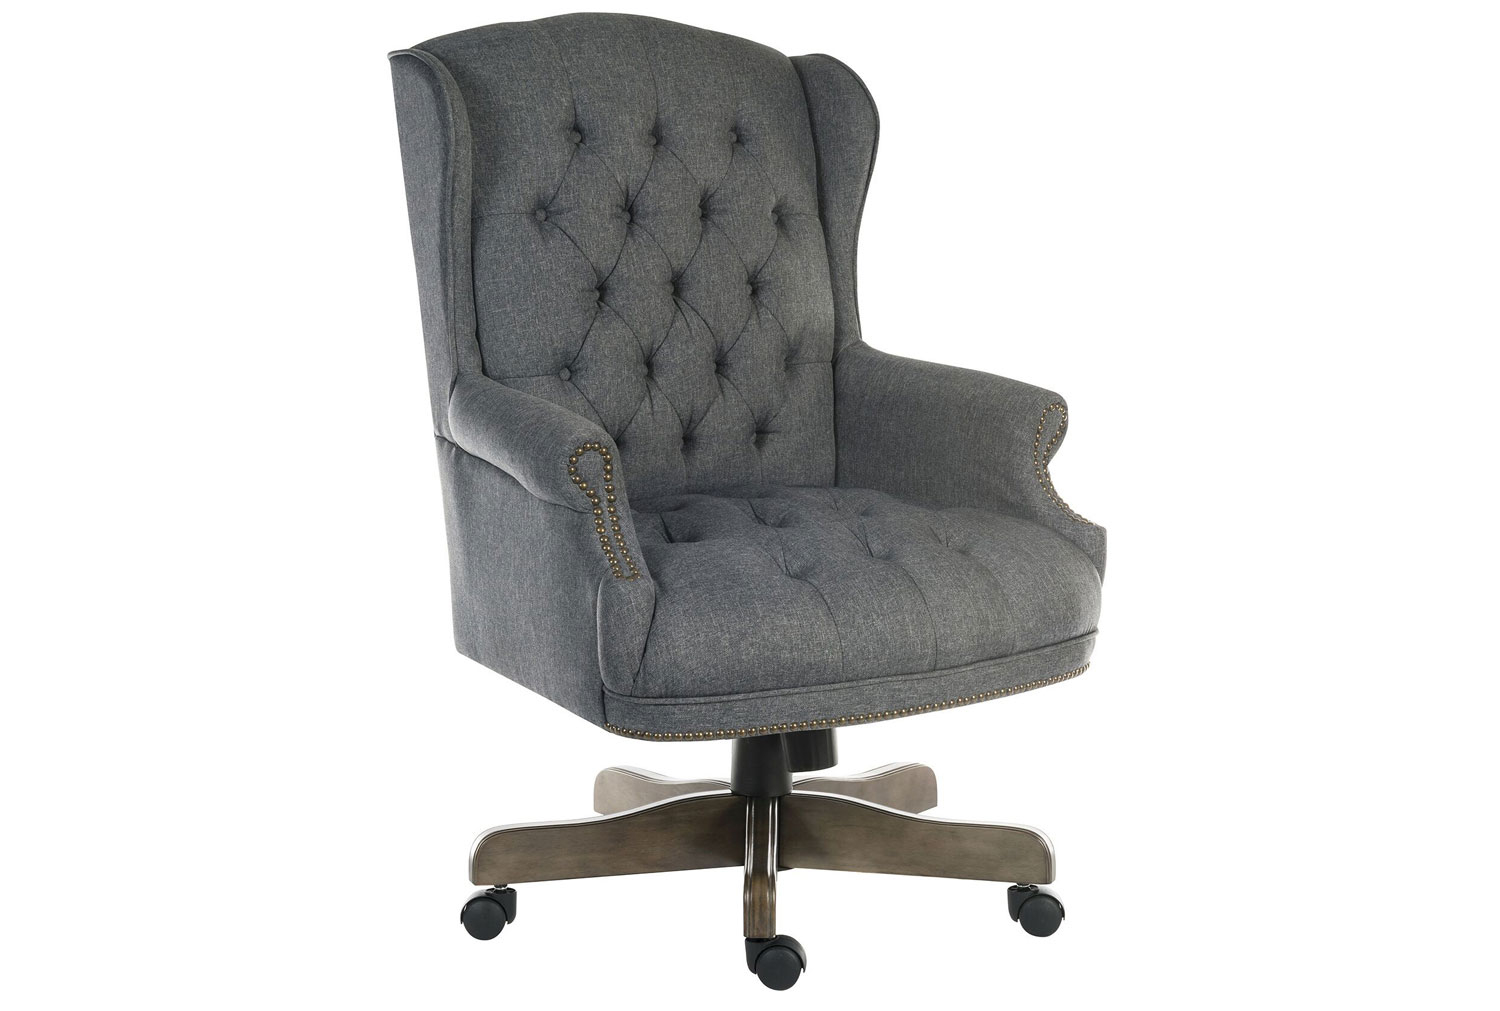 Office Chairman Executive Office Chair Grey Fabric, Express Delivery